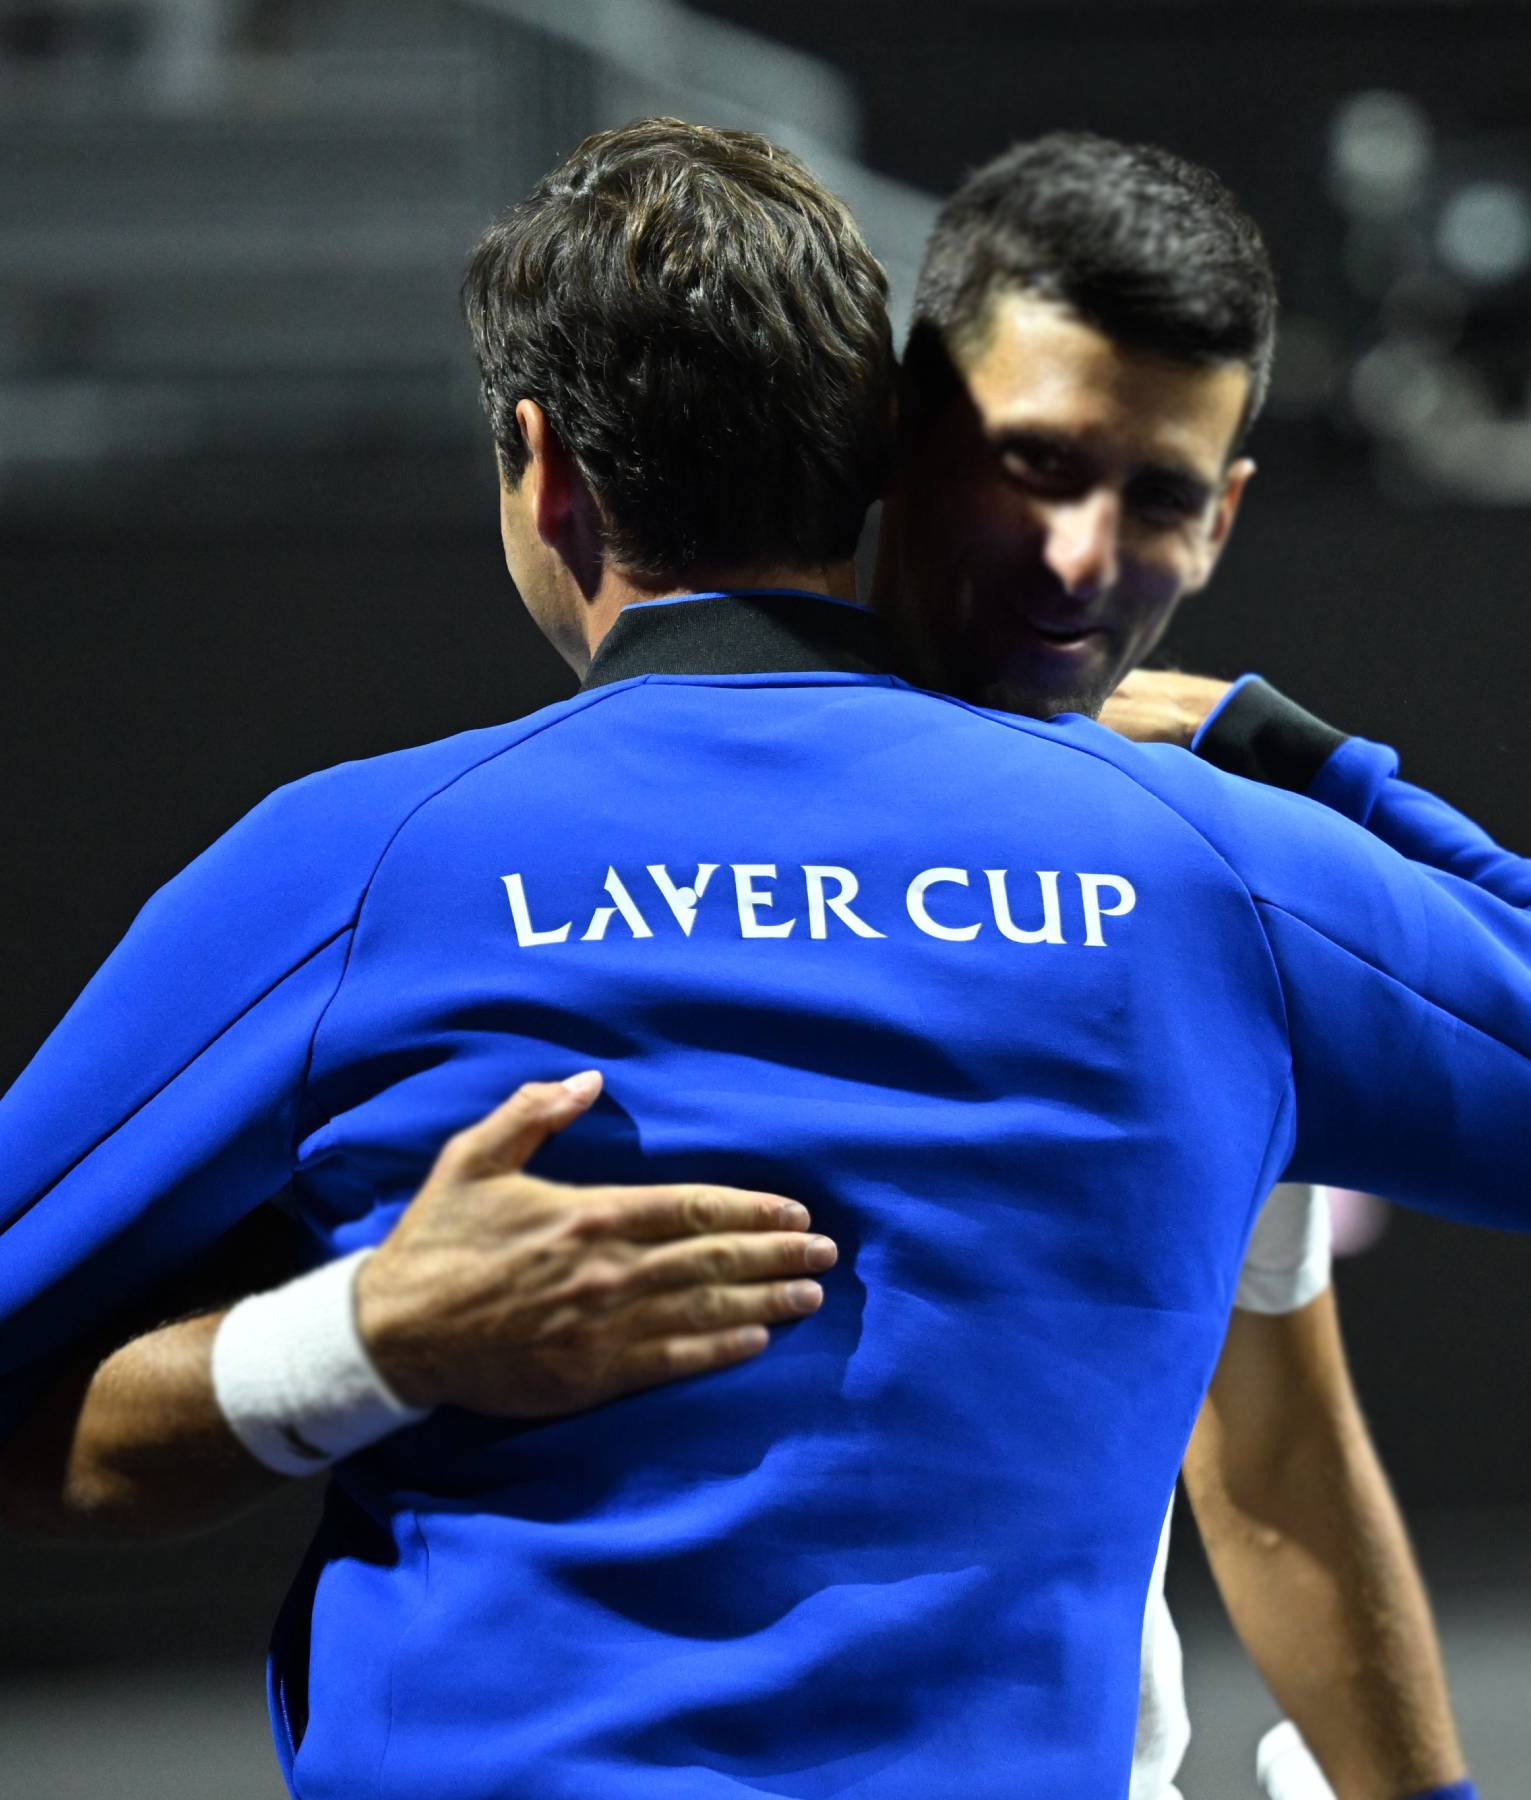 Europe Laver Cup Blue Jacket (3)